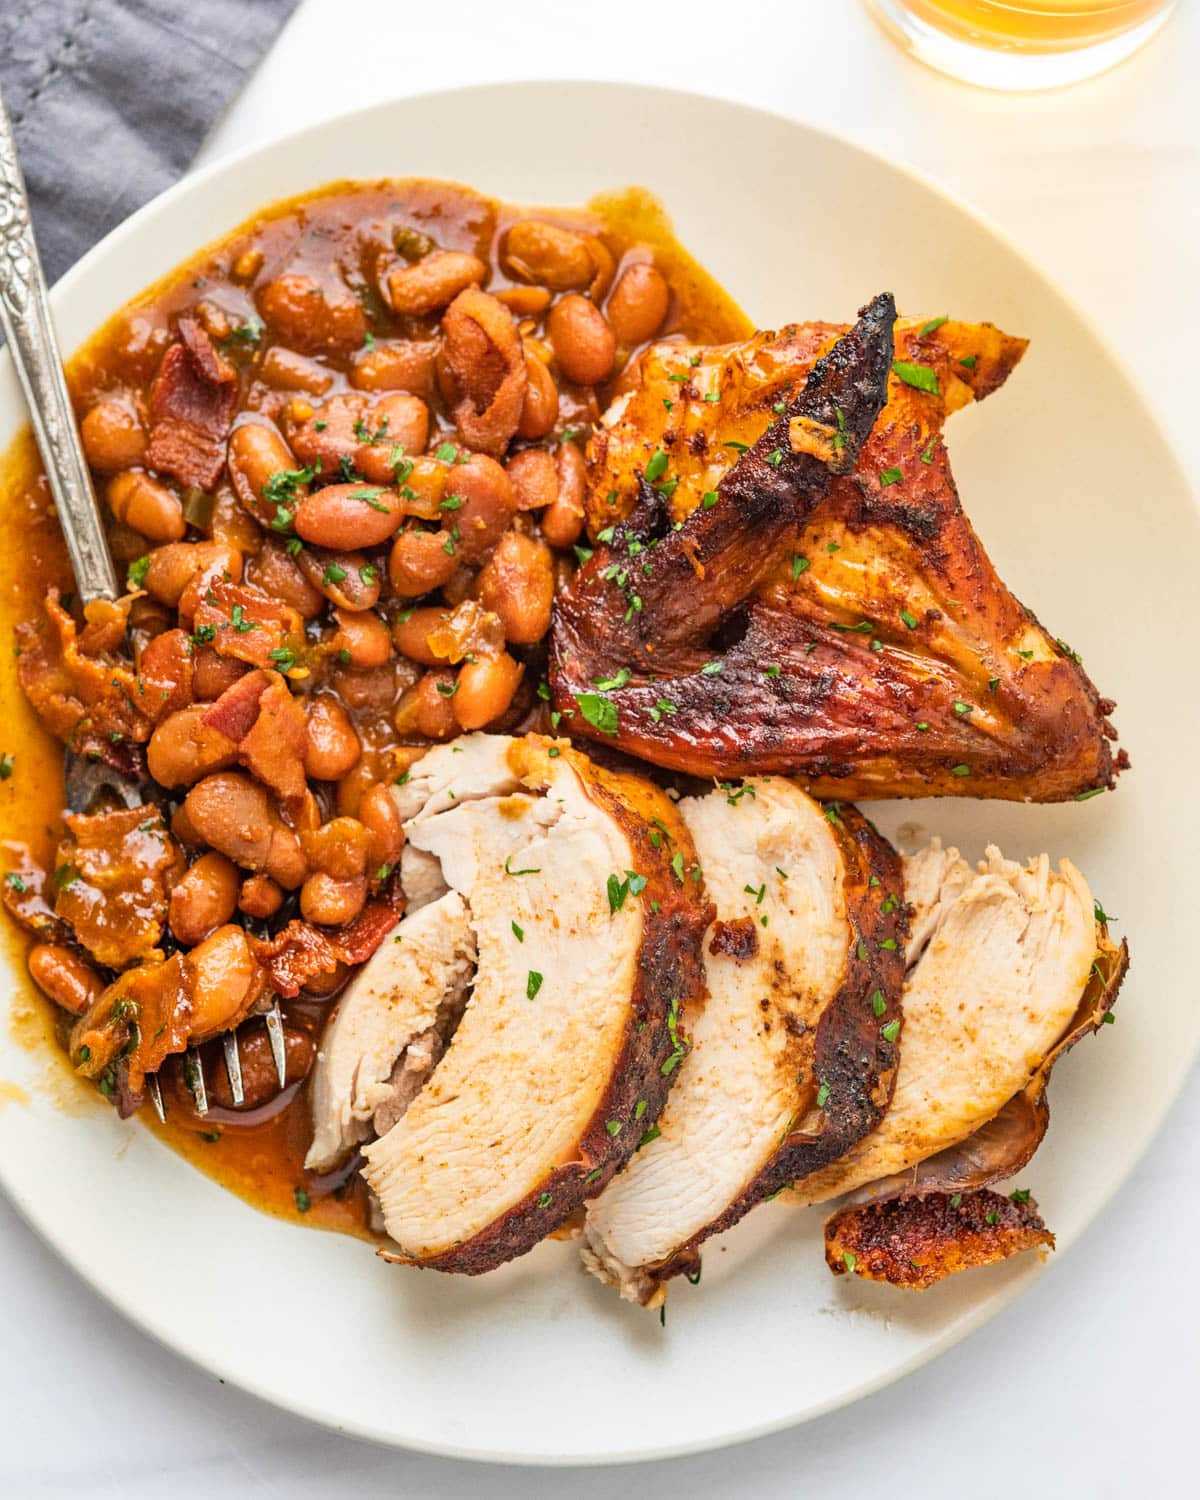 A plate of chicken breast and wing with baked beans on the side.